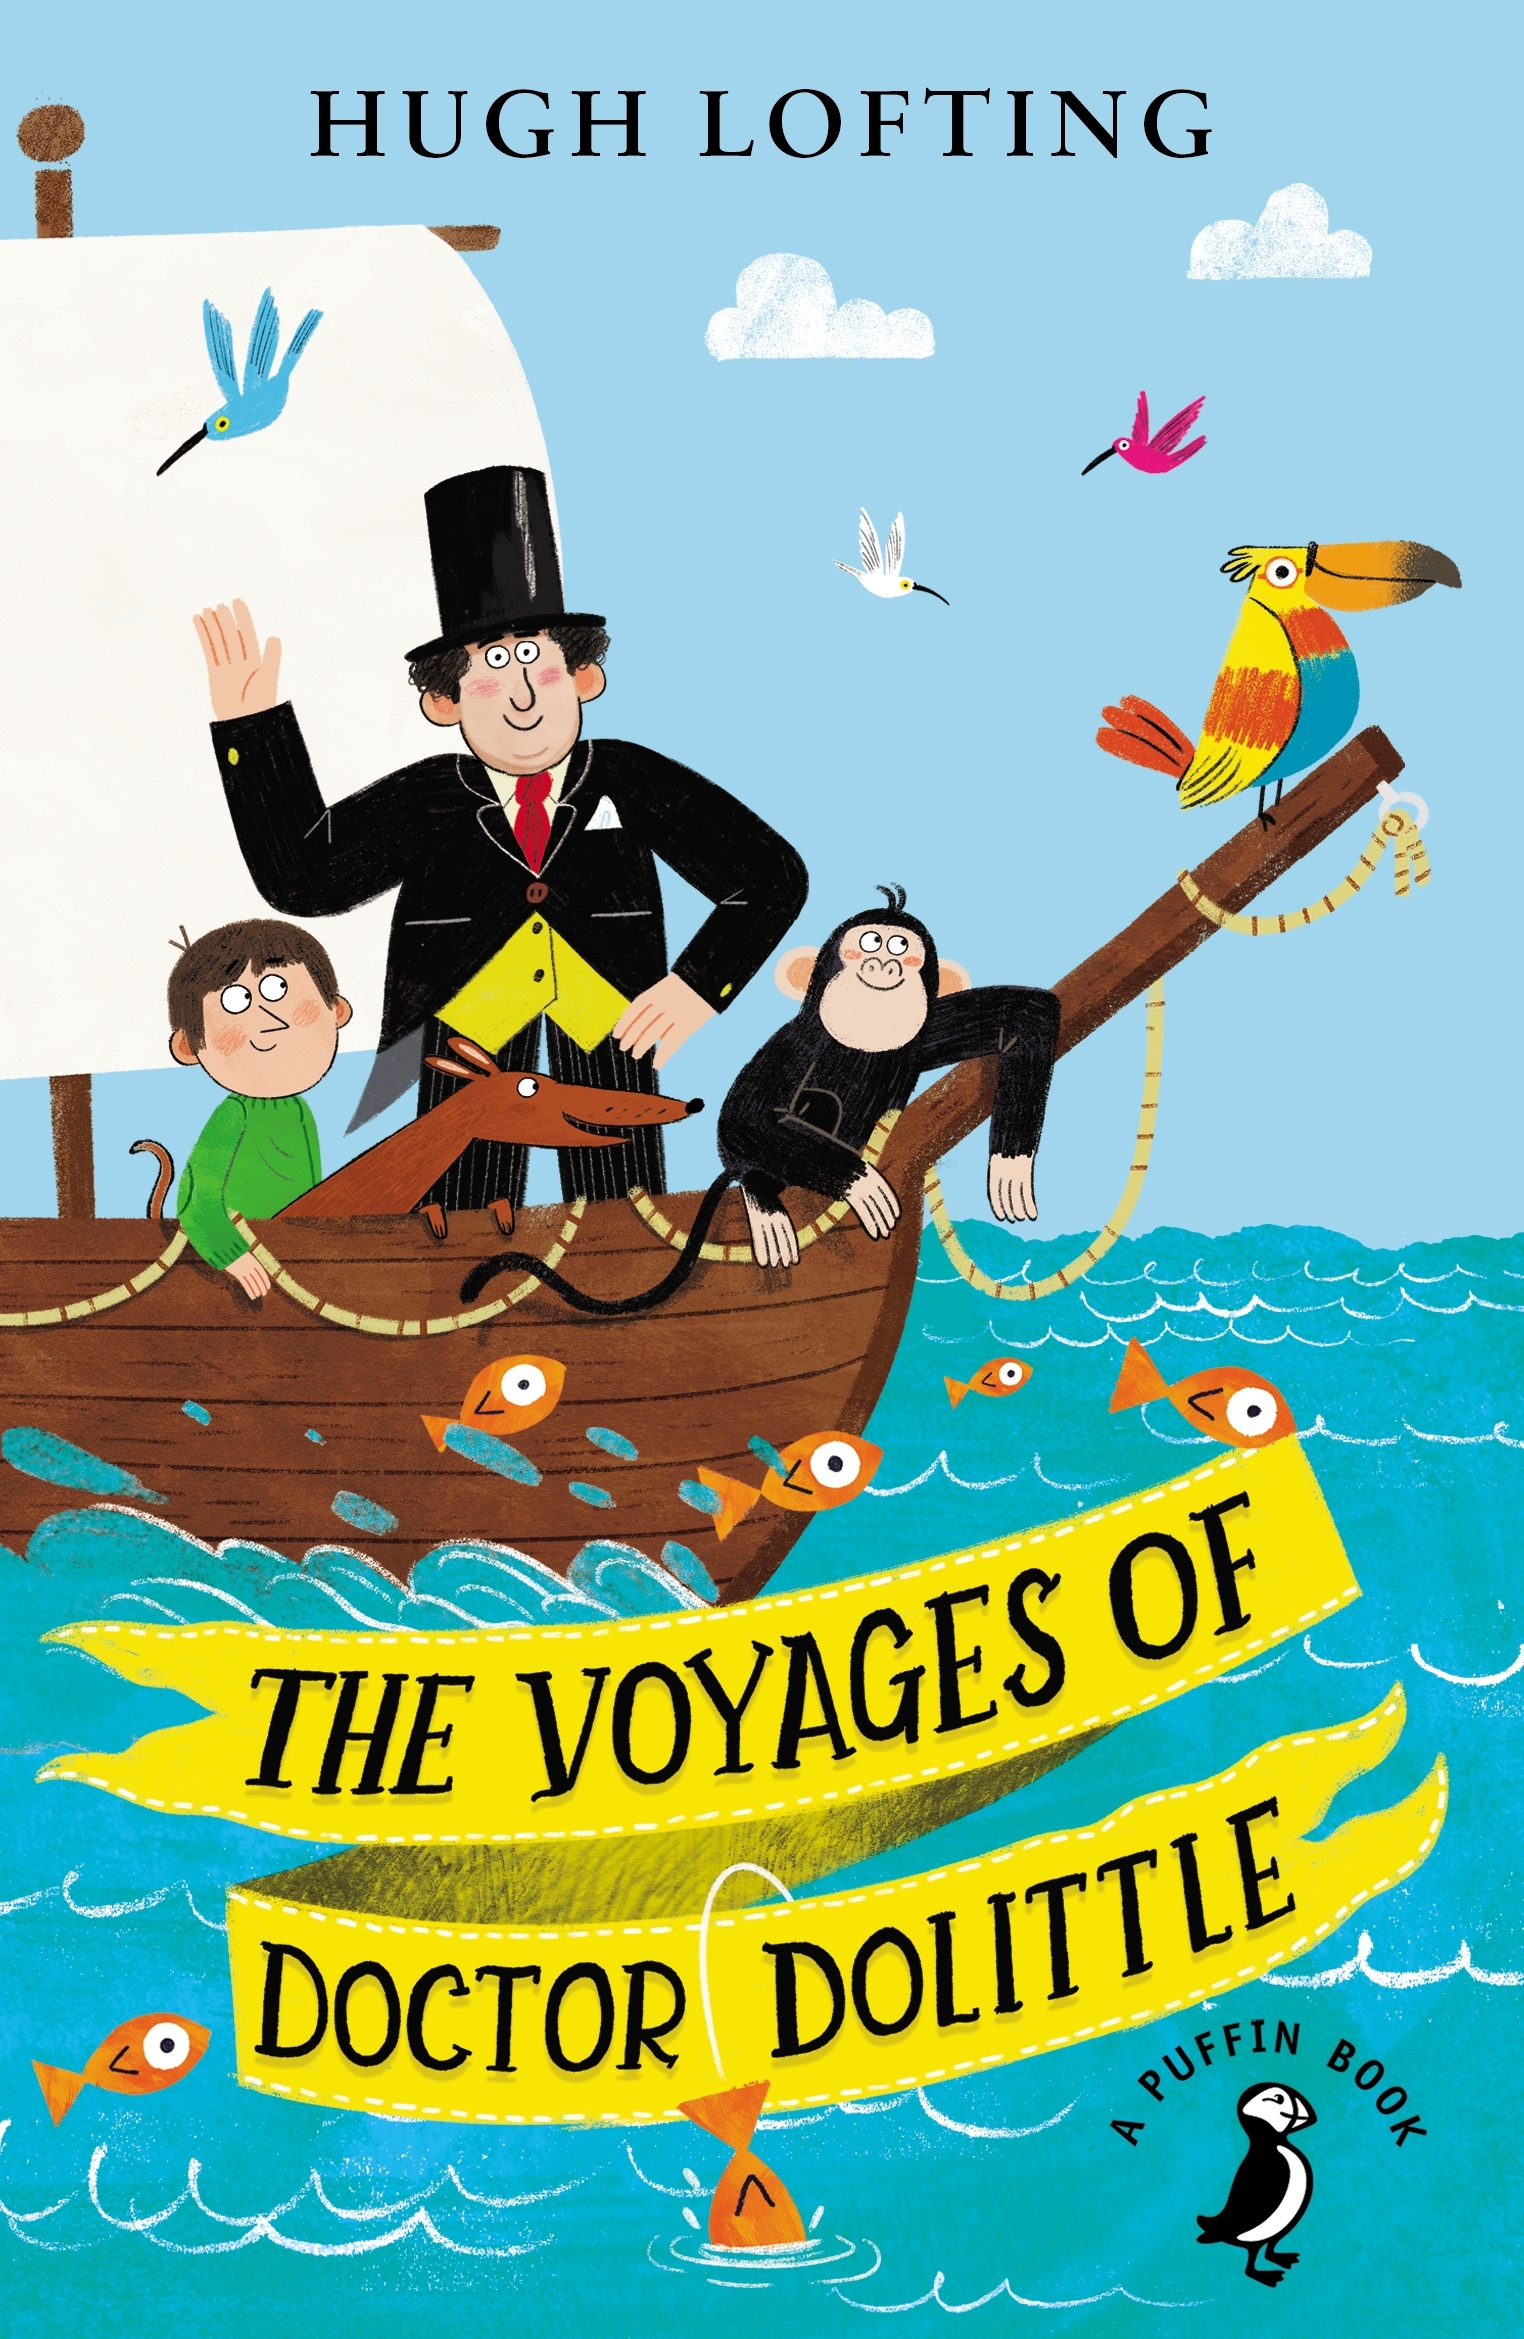 The voyage of doctor dolittle